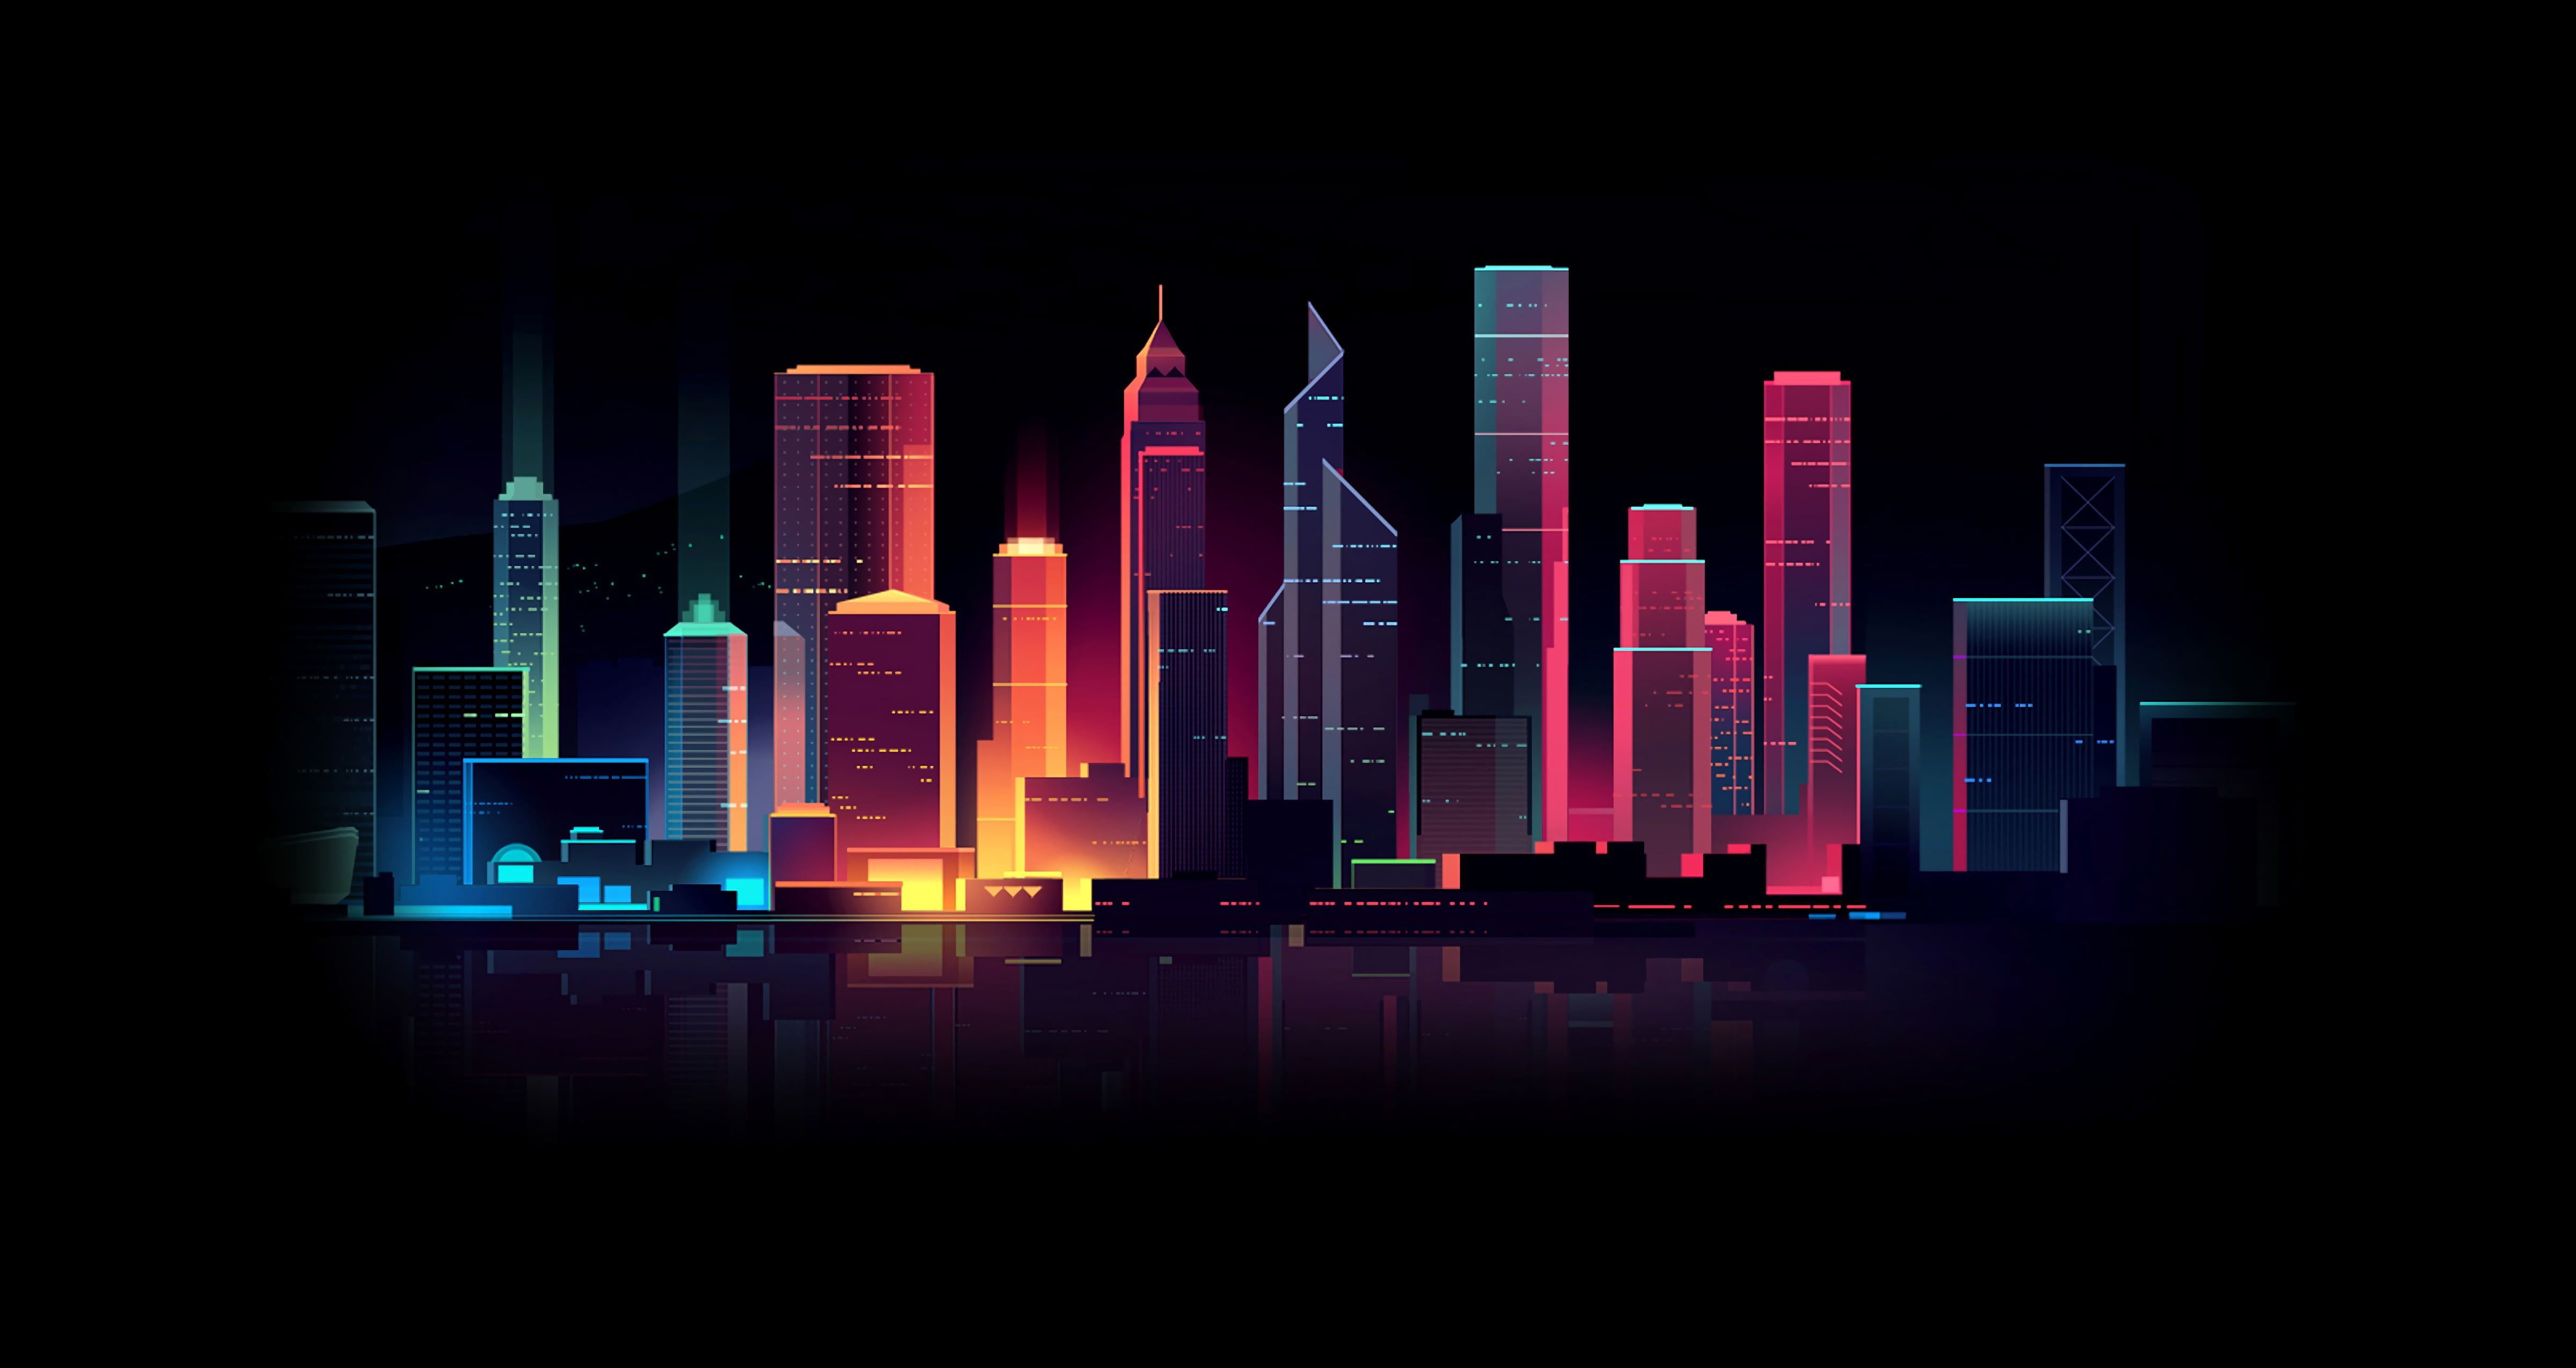 Home #Minimalism #Night #Vector The city #Light #Style #Building #Architecture #Art #Style #Neon #Lighting #Illustration #Retrowave #Synthwave Romain Trystram